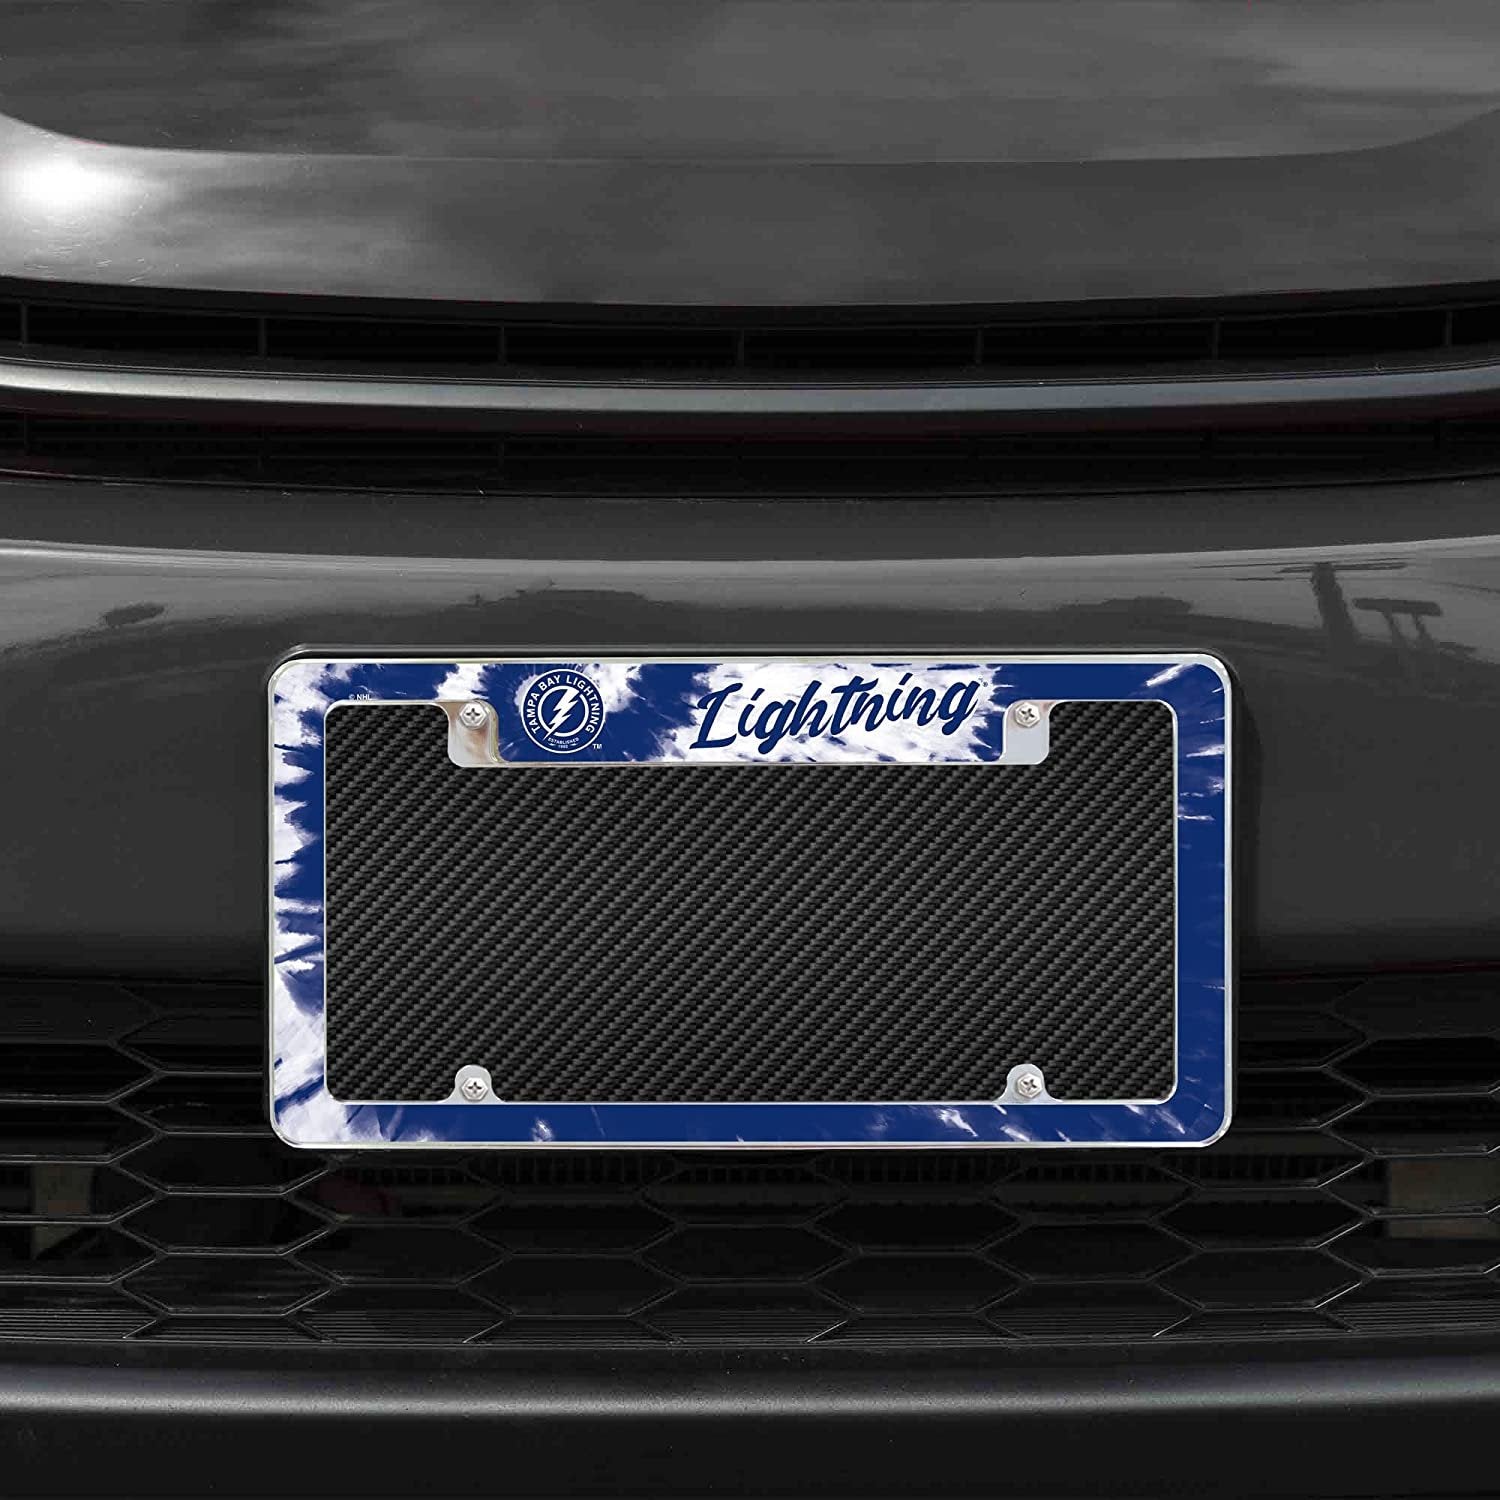 Tampa Bay Lightning Metal License Plate Frame Chrome Tag Cover Tie Dye Design 6x12 Inch